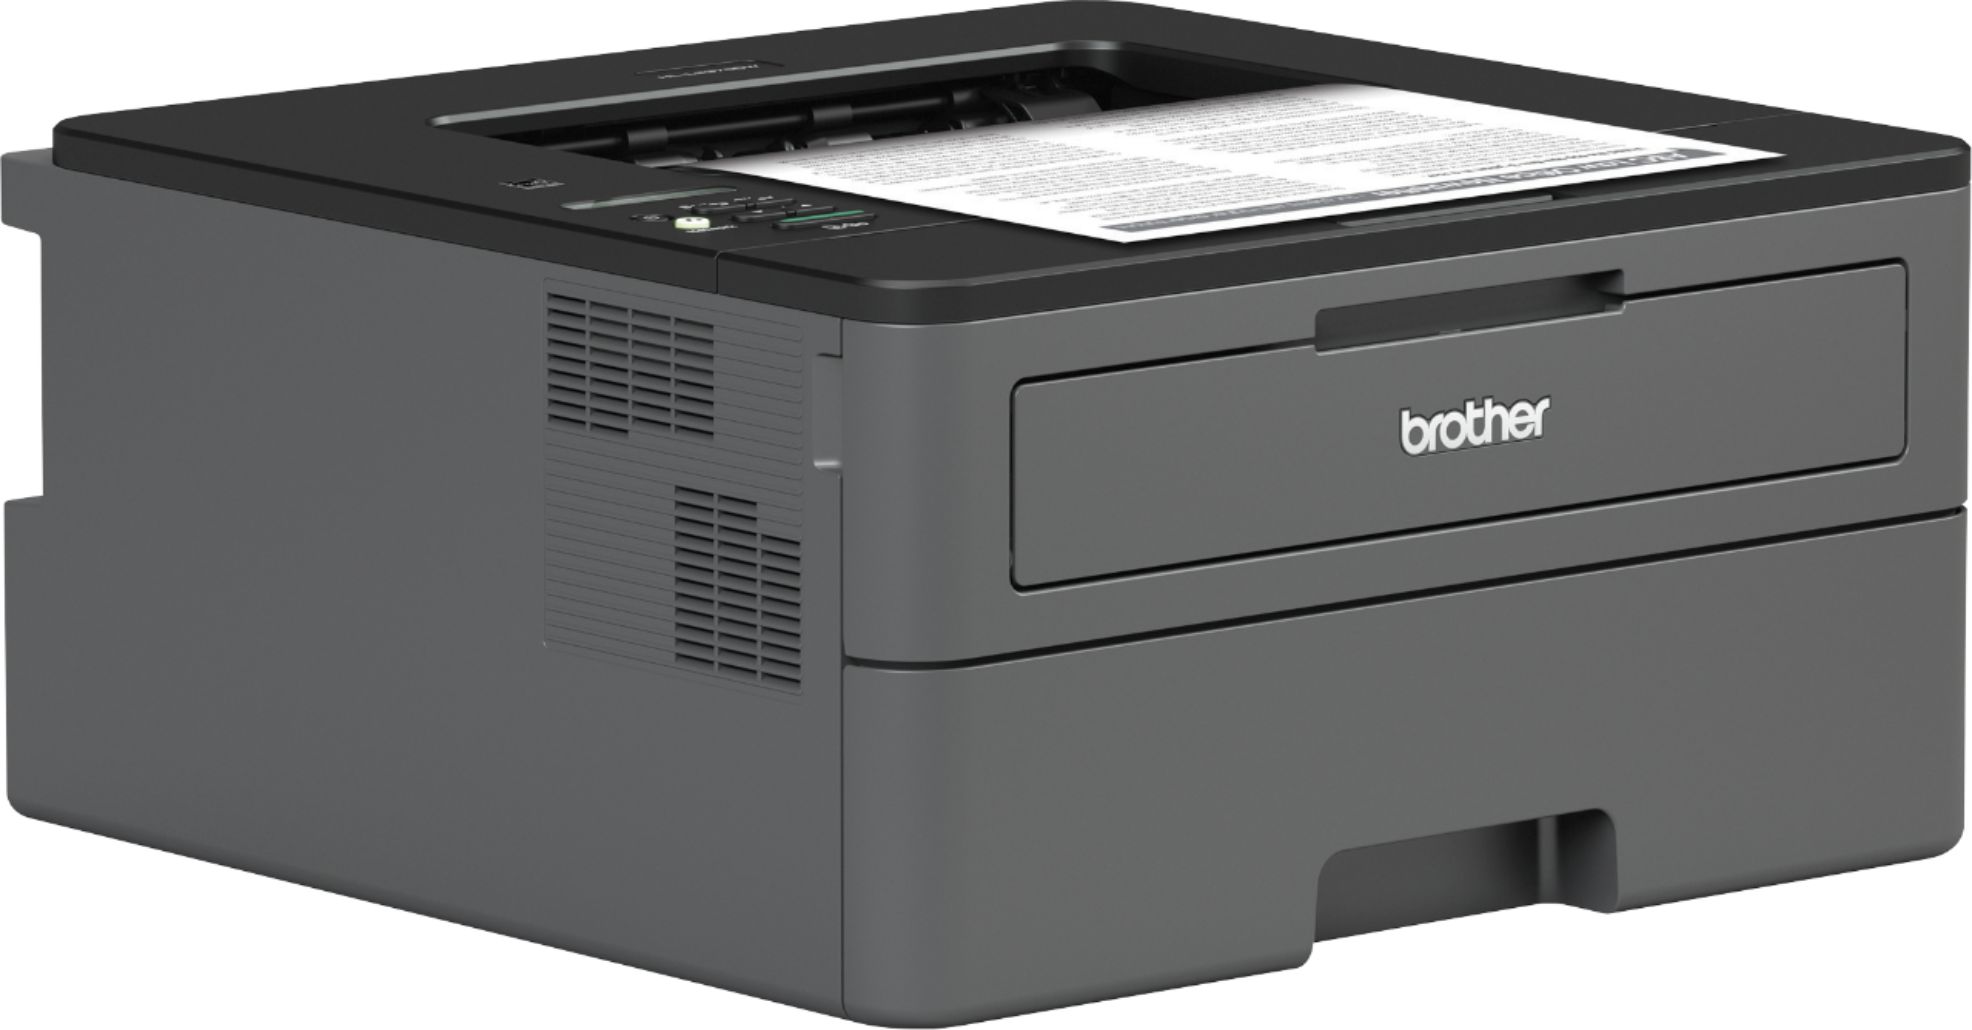 Brother HL-L2350DW Compact Monochrome Laser Printer, Wireless Printing,  Duplex Two-Sided Printing 